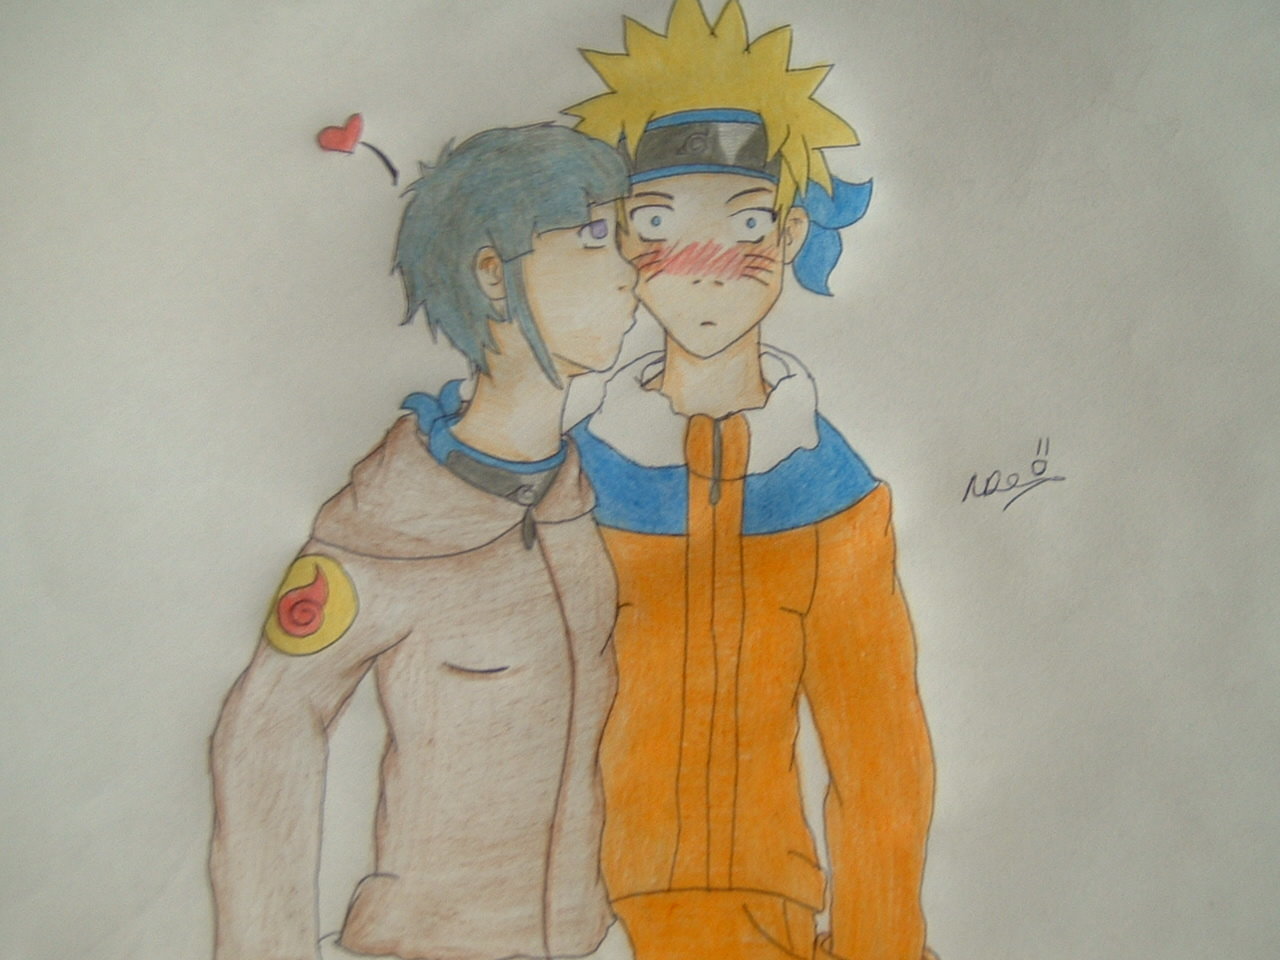 Request for luffylover222 by little_romy_fan